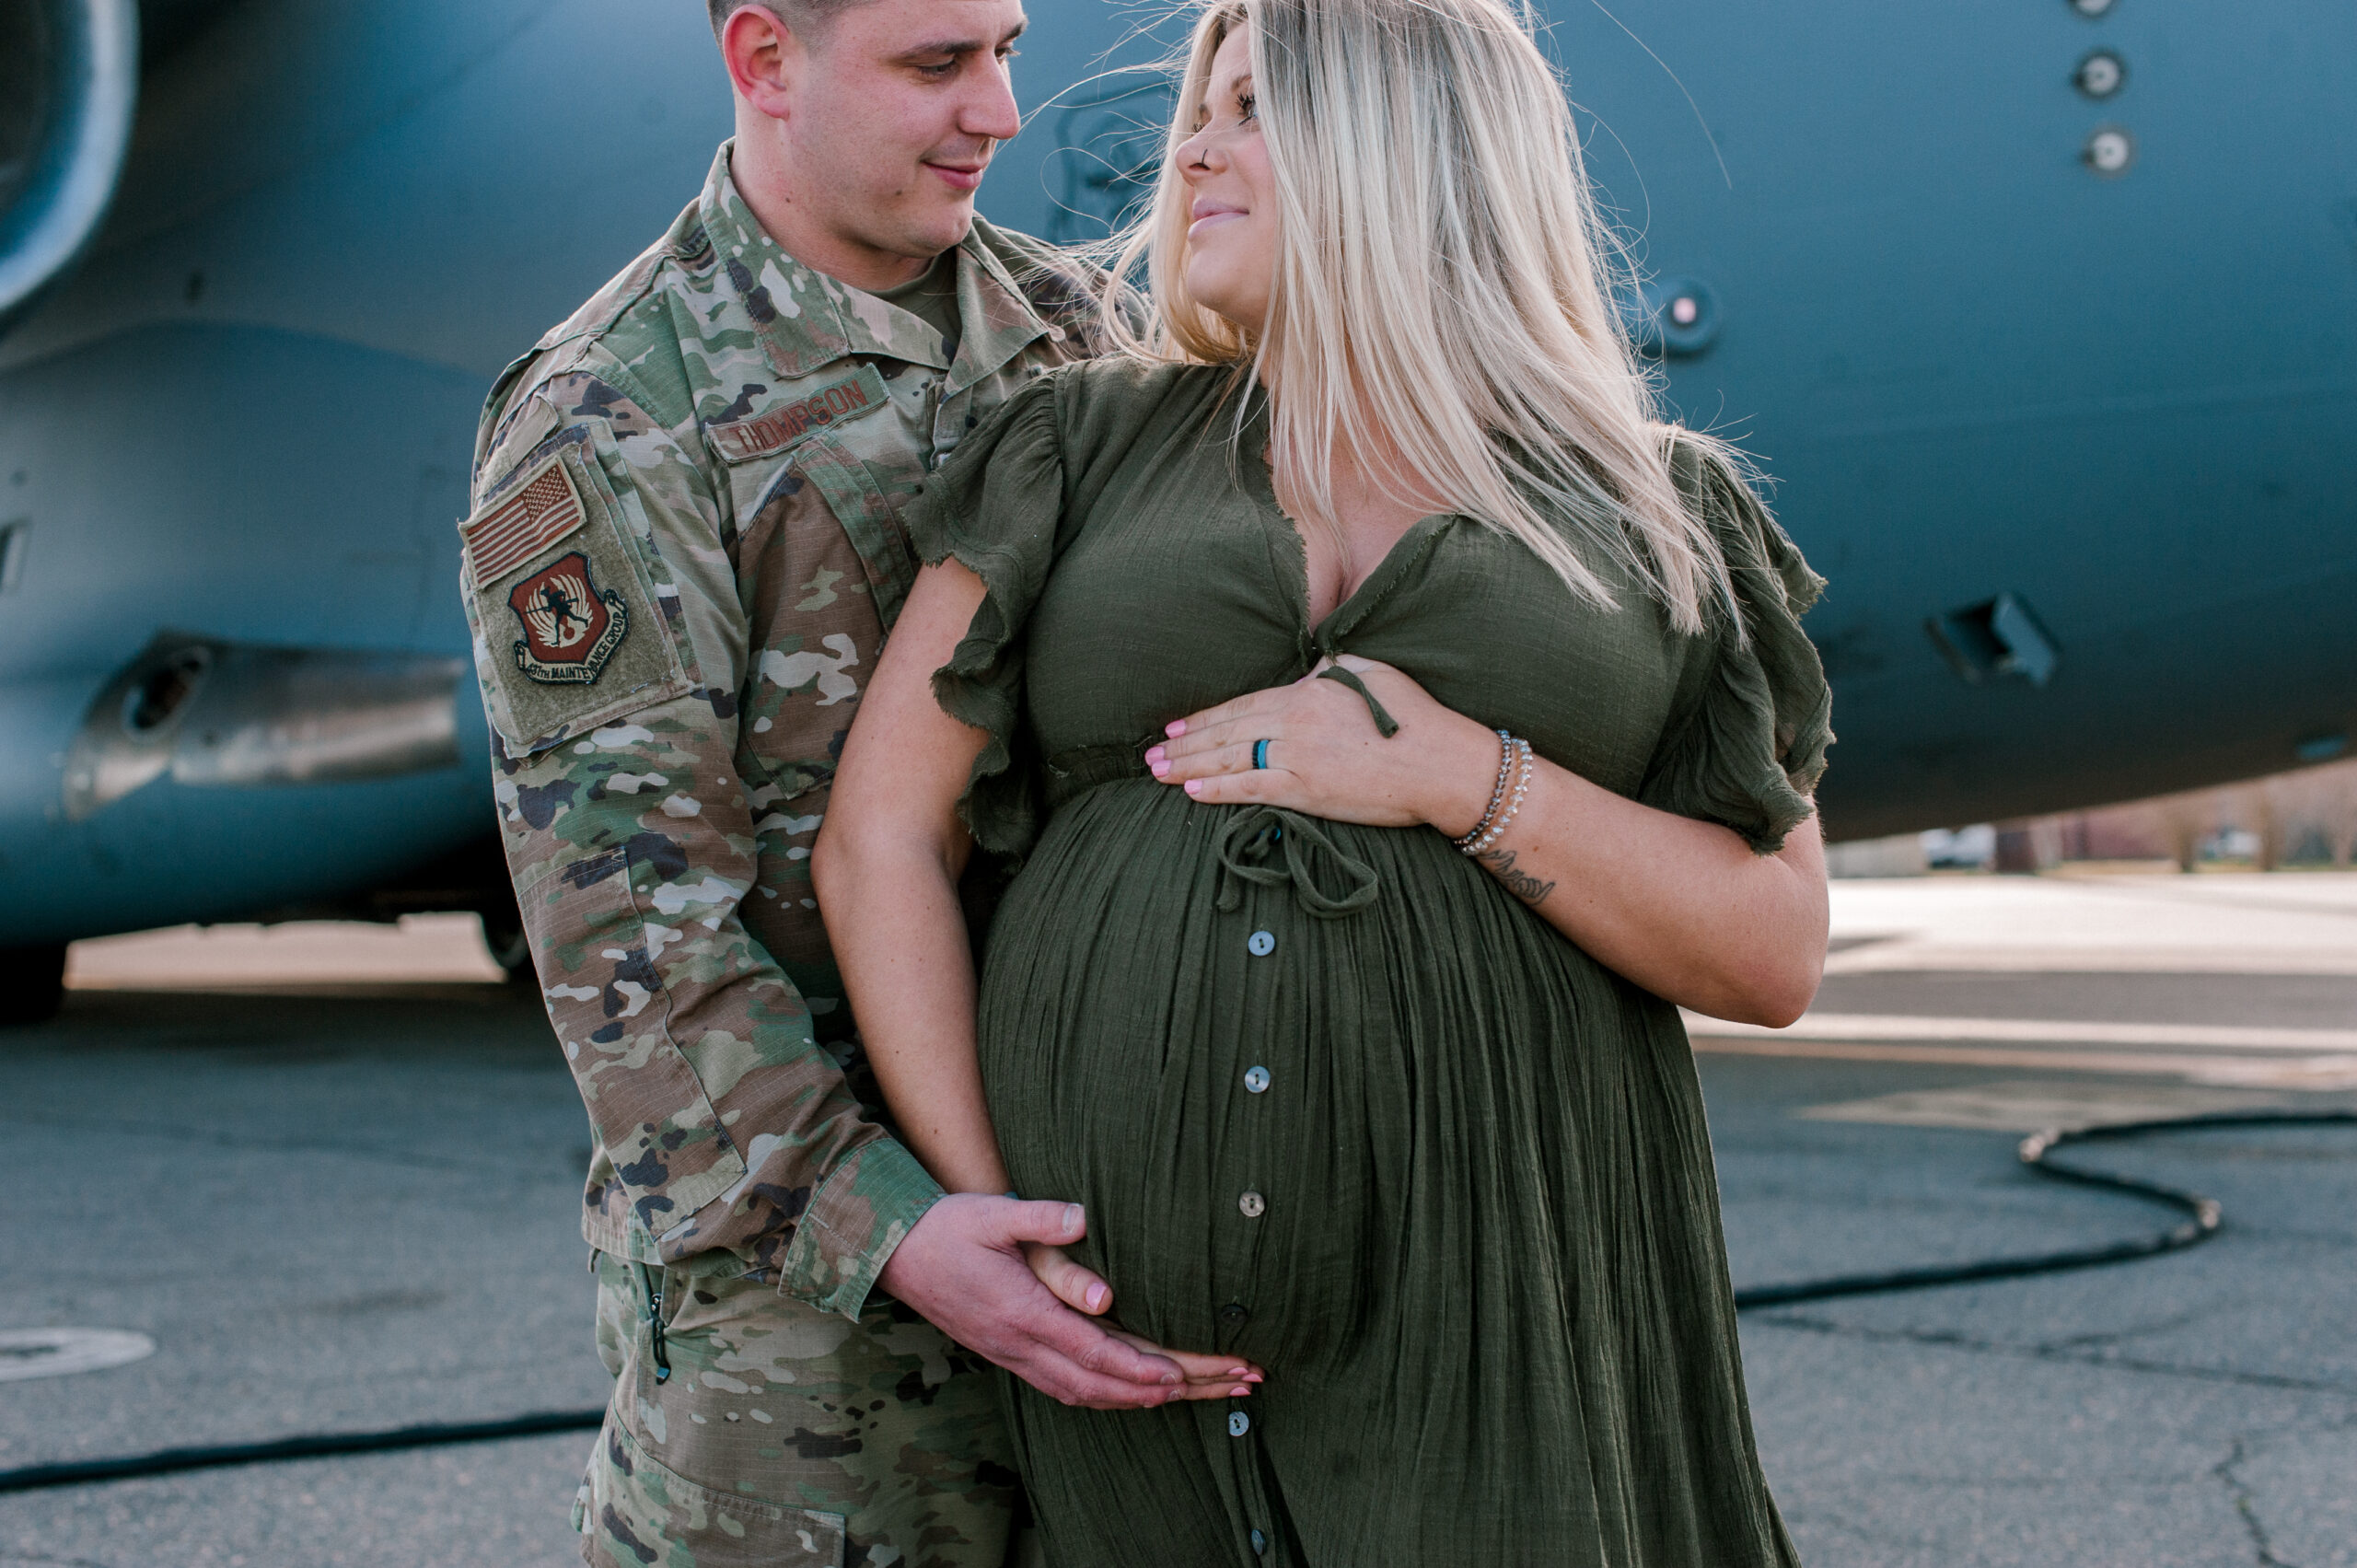 Close up of new mom and dad in front of military aircraft, mom holding her belly while thinking about Hibiscus Women's Center.